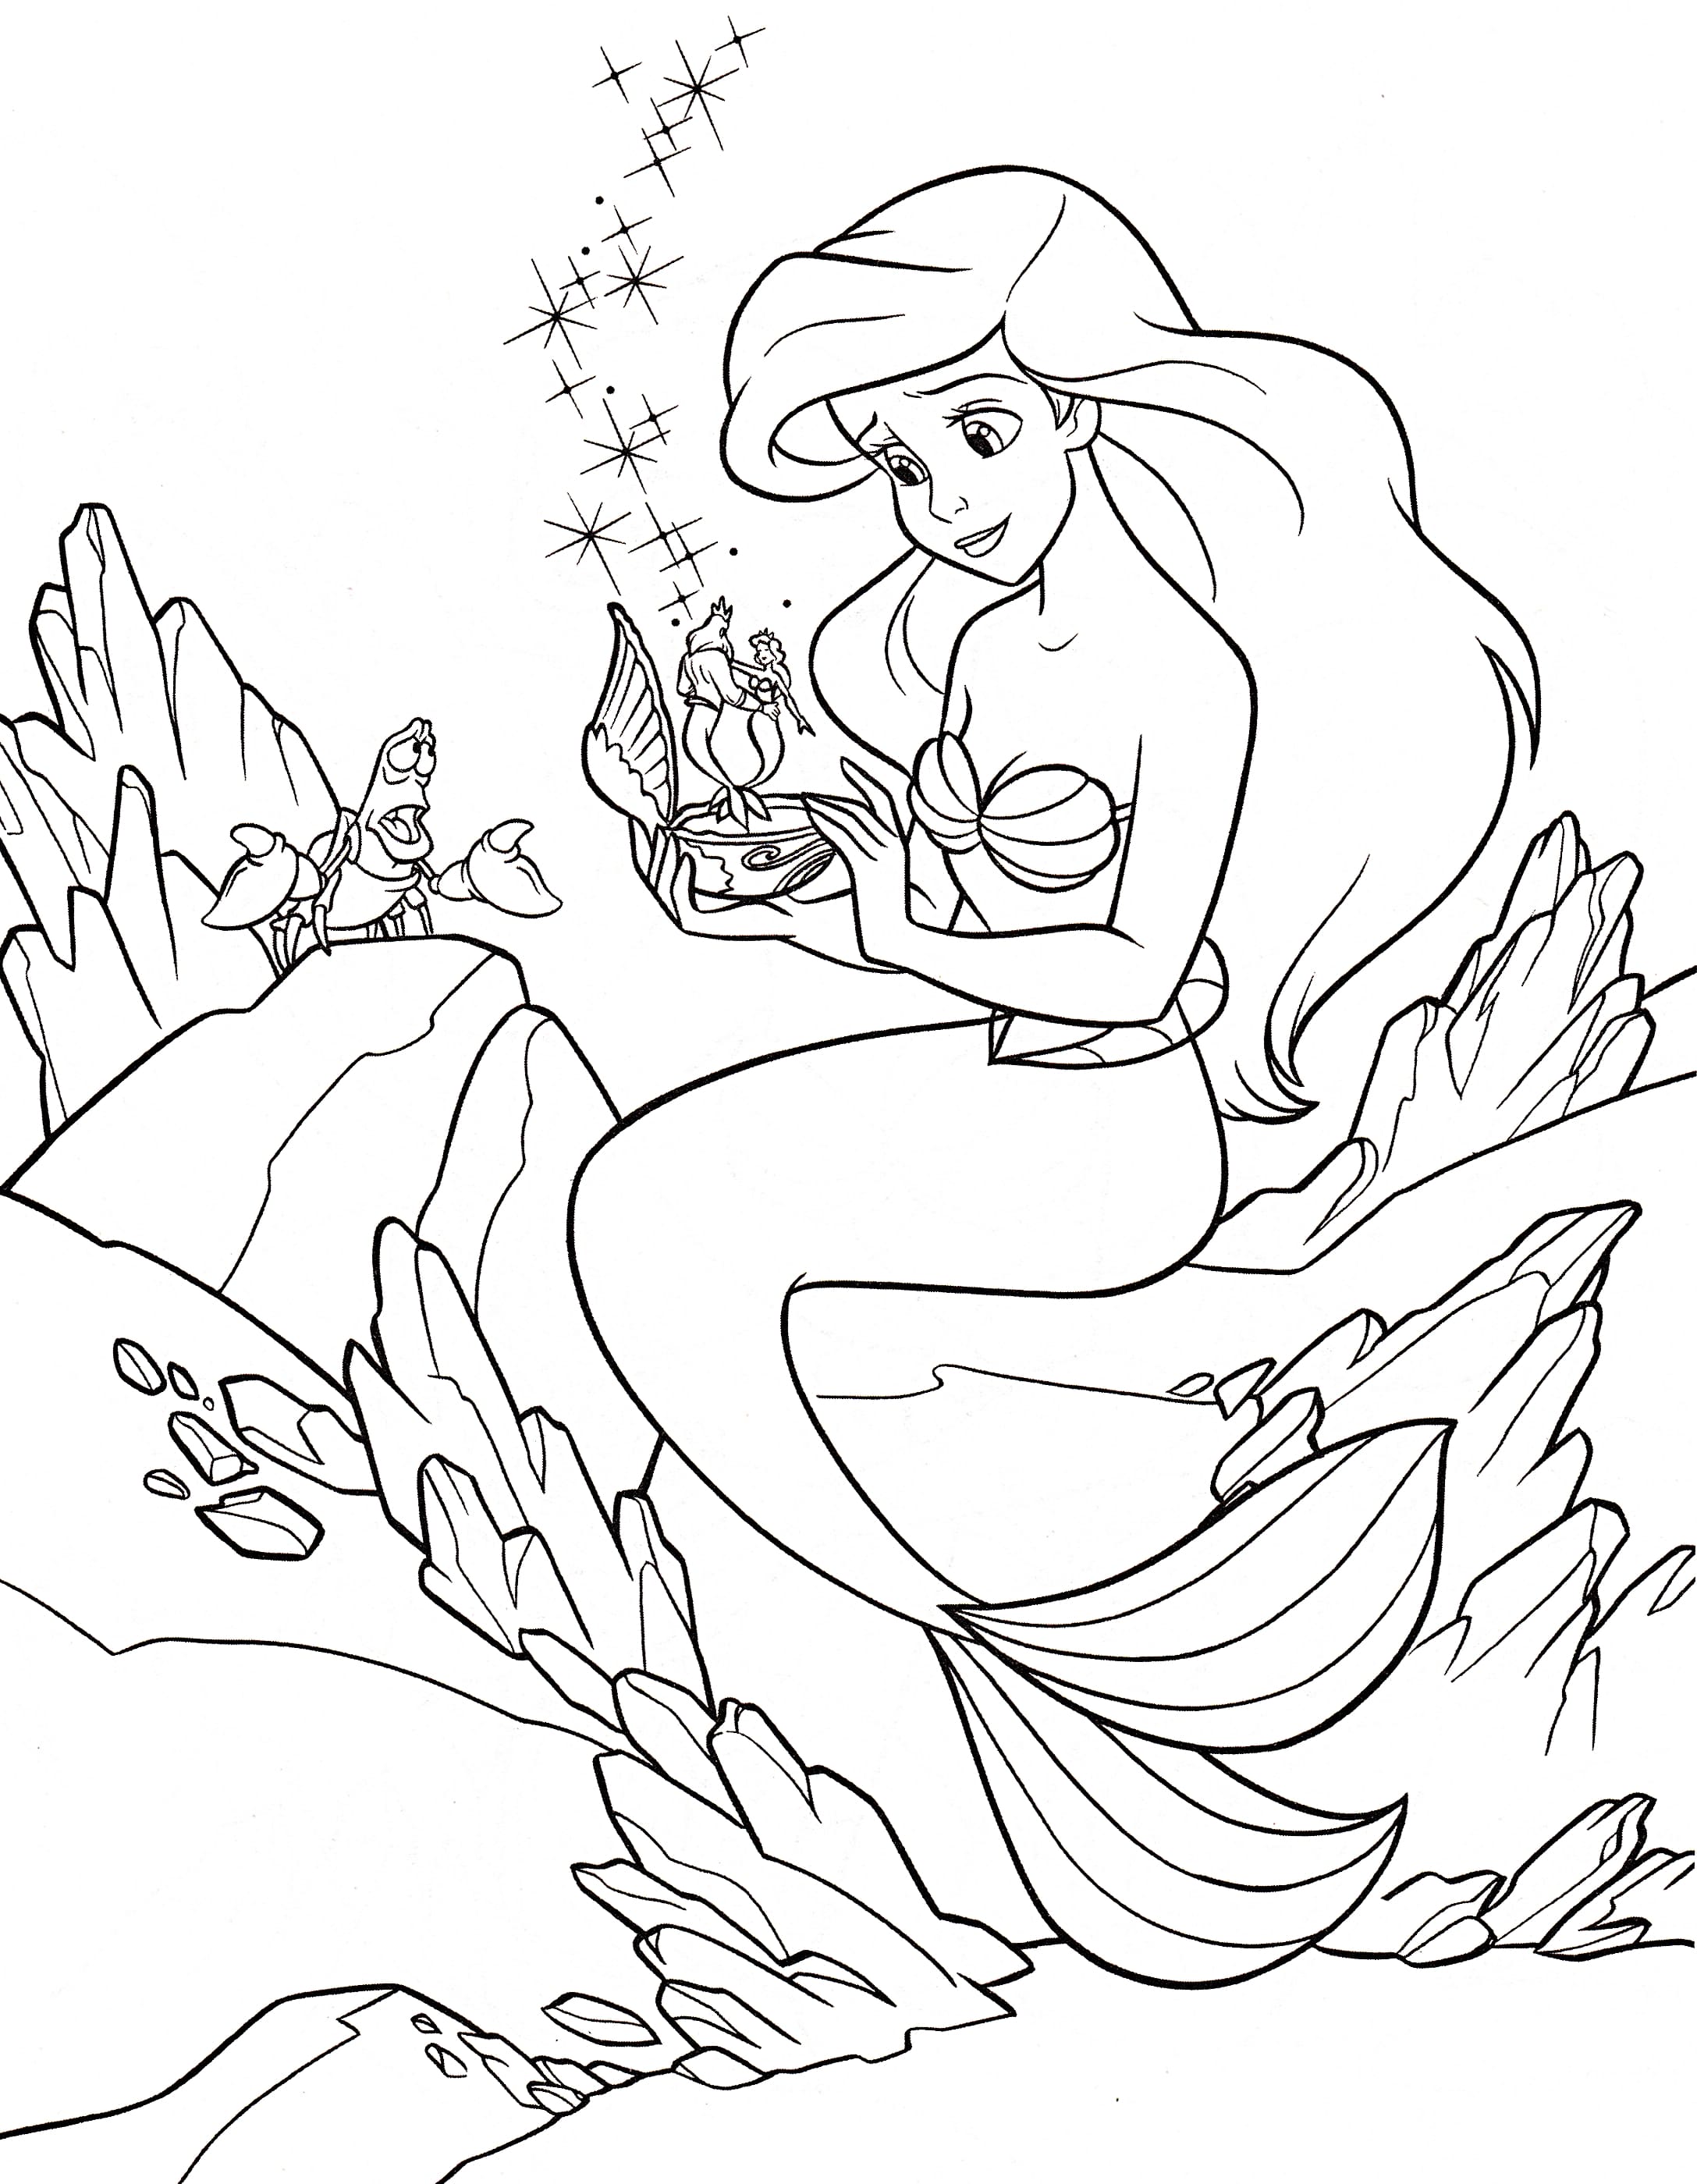 Disney Coloring Pages. 100 Images Free Printable